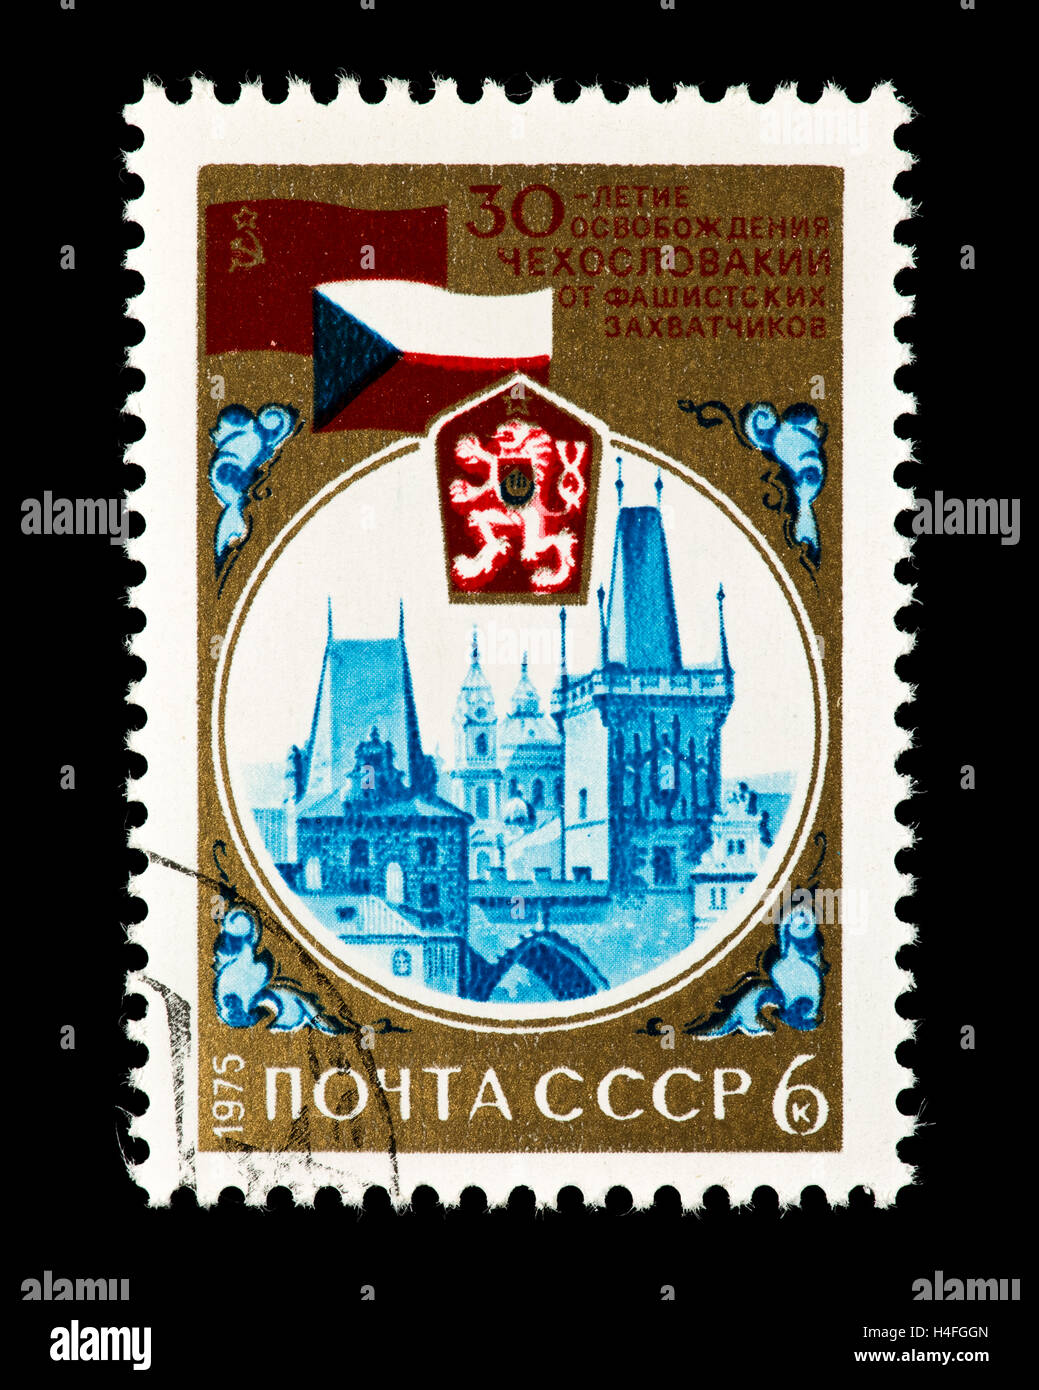 Postage stamp from the Soviet Union depicting the Charles Bridge towers, arms and flag (30th ann liberation of Czechoslovakia). Stock Photo